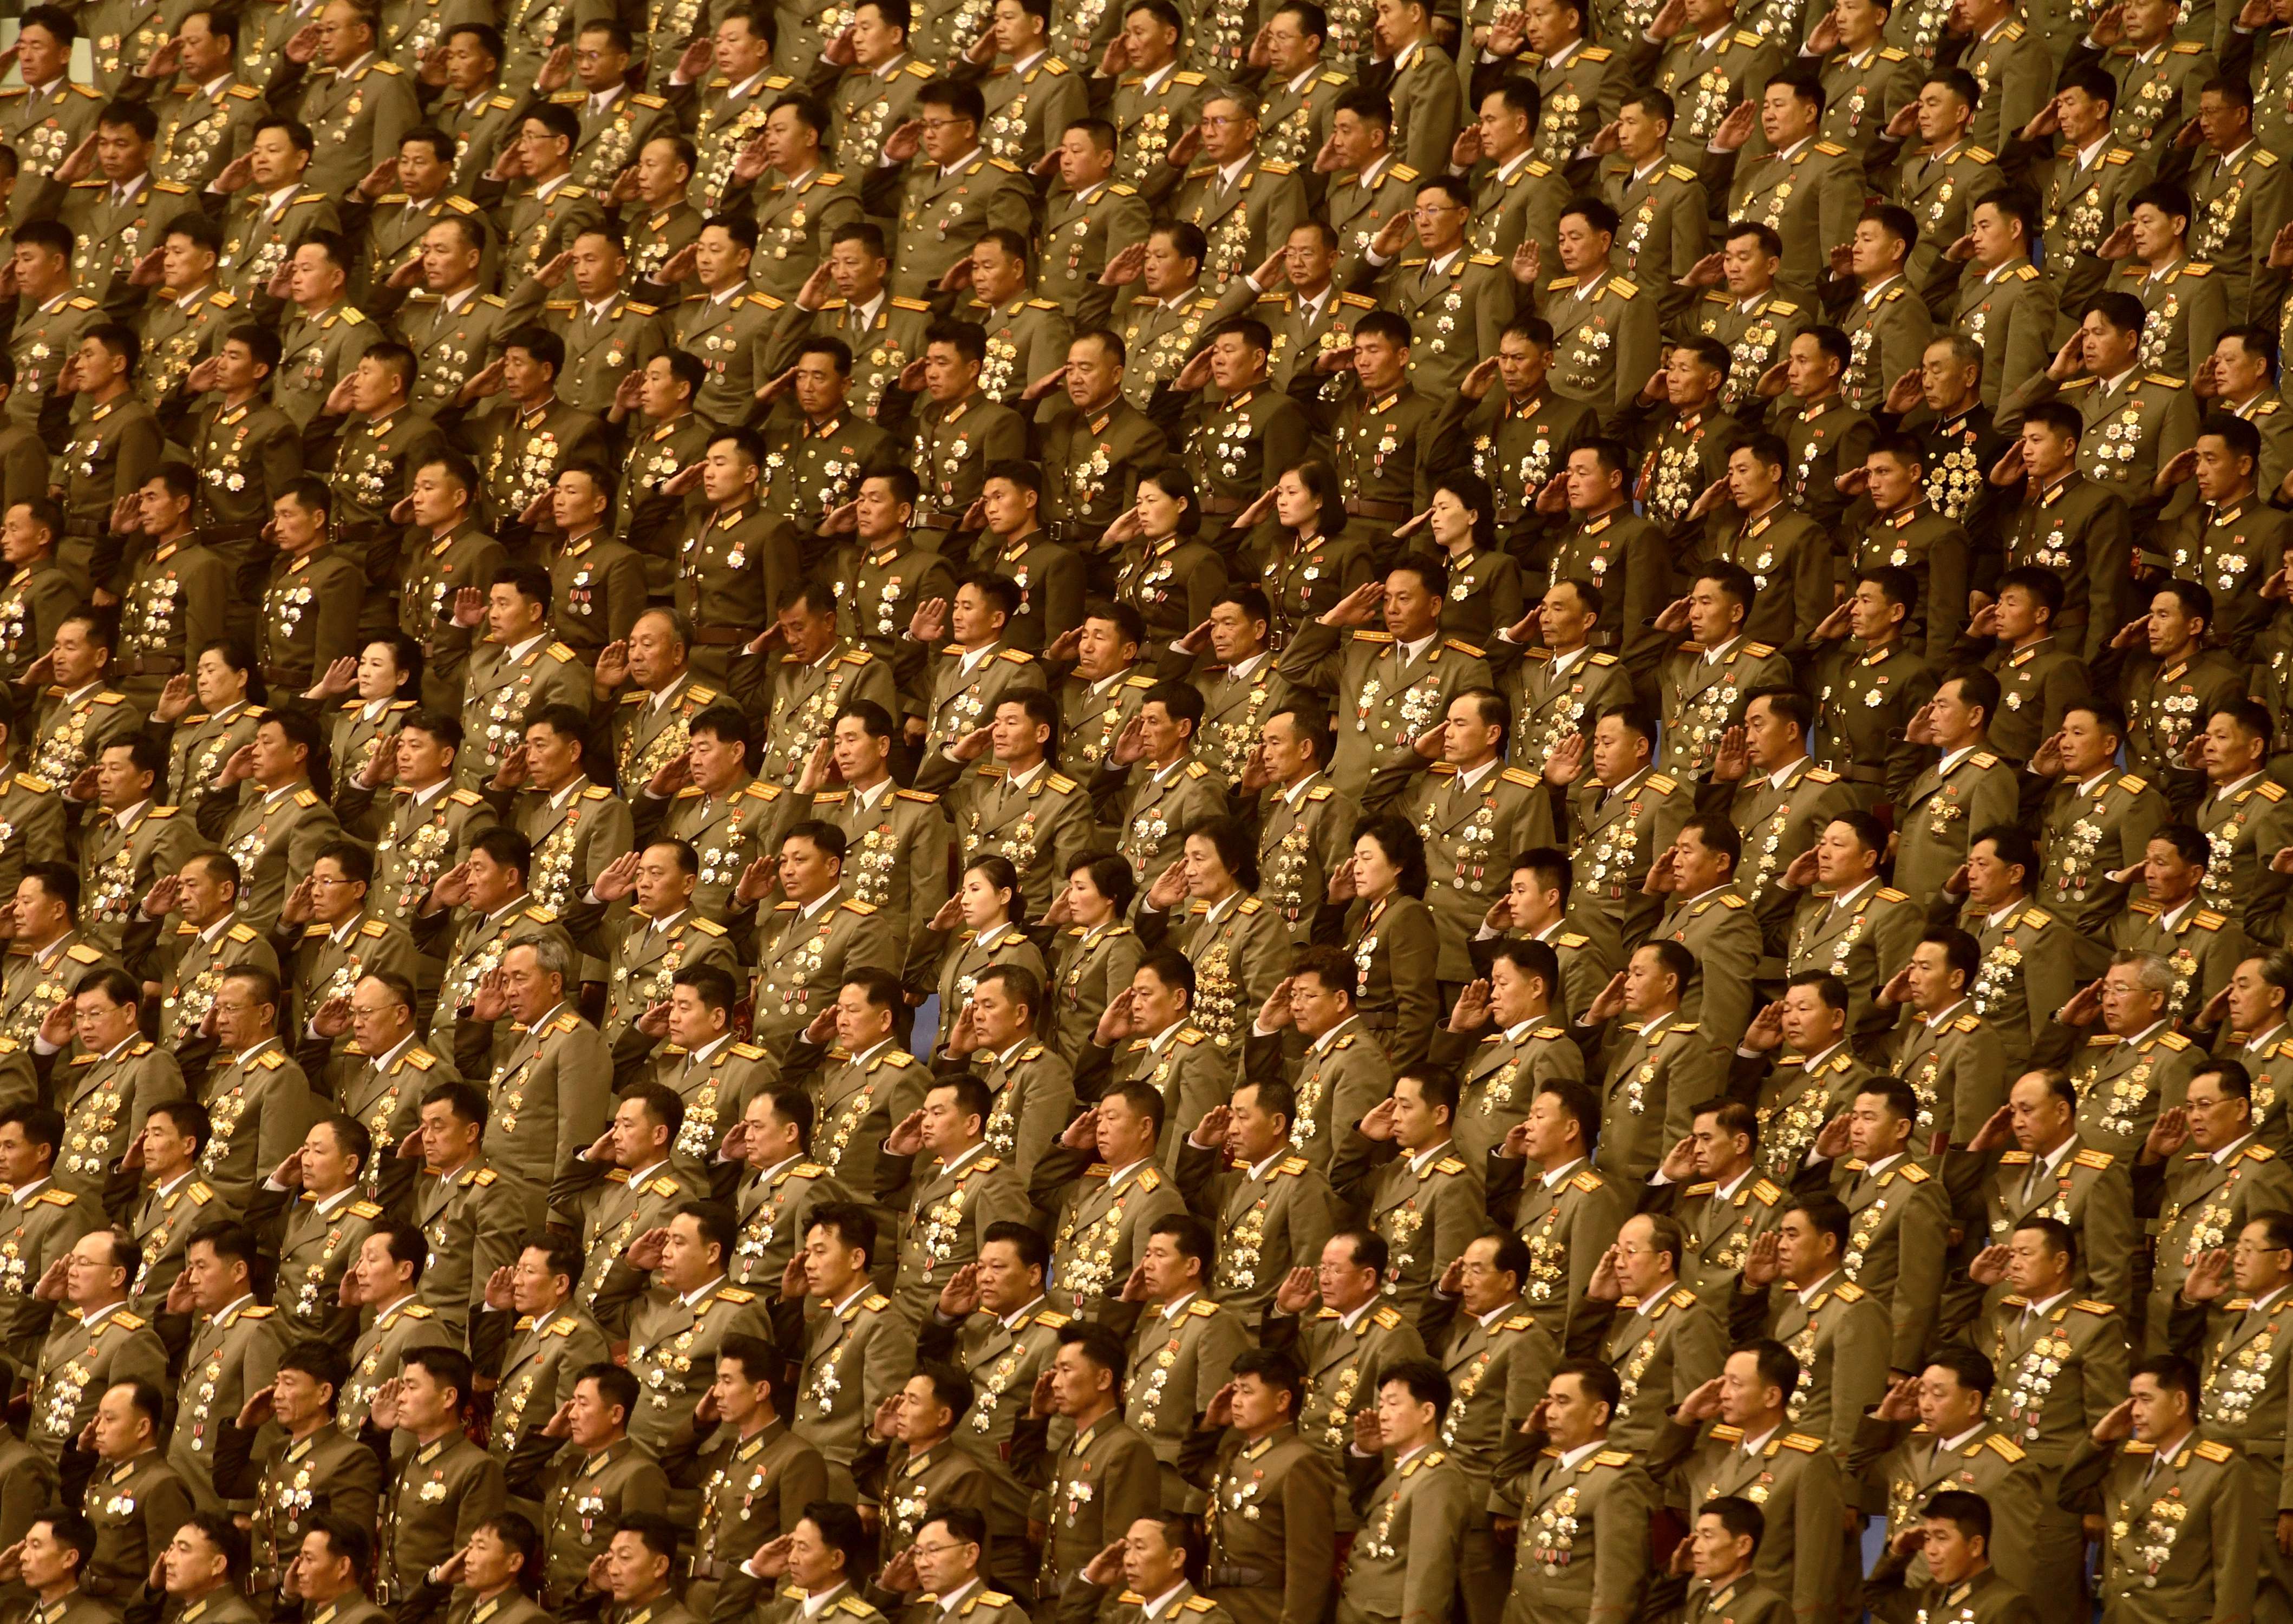 North Korean military officials salute during a patriotic concert in the Pyongyang Arena, in May last year. Photo: Washington Post